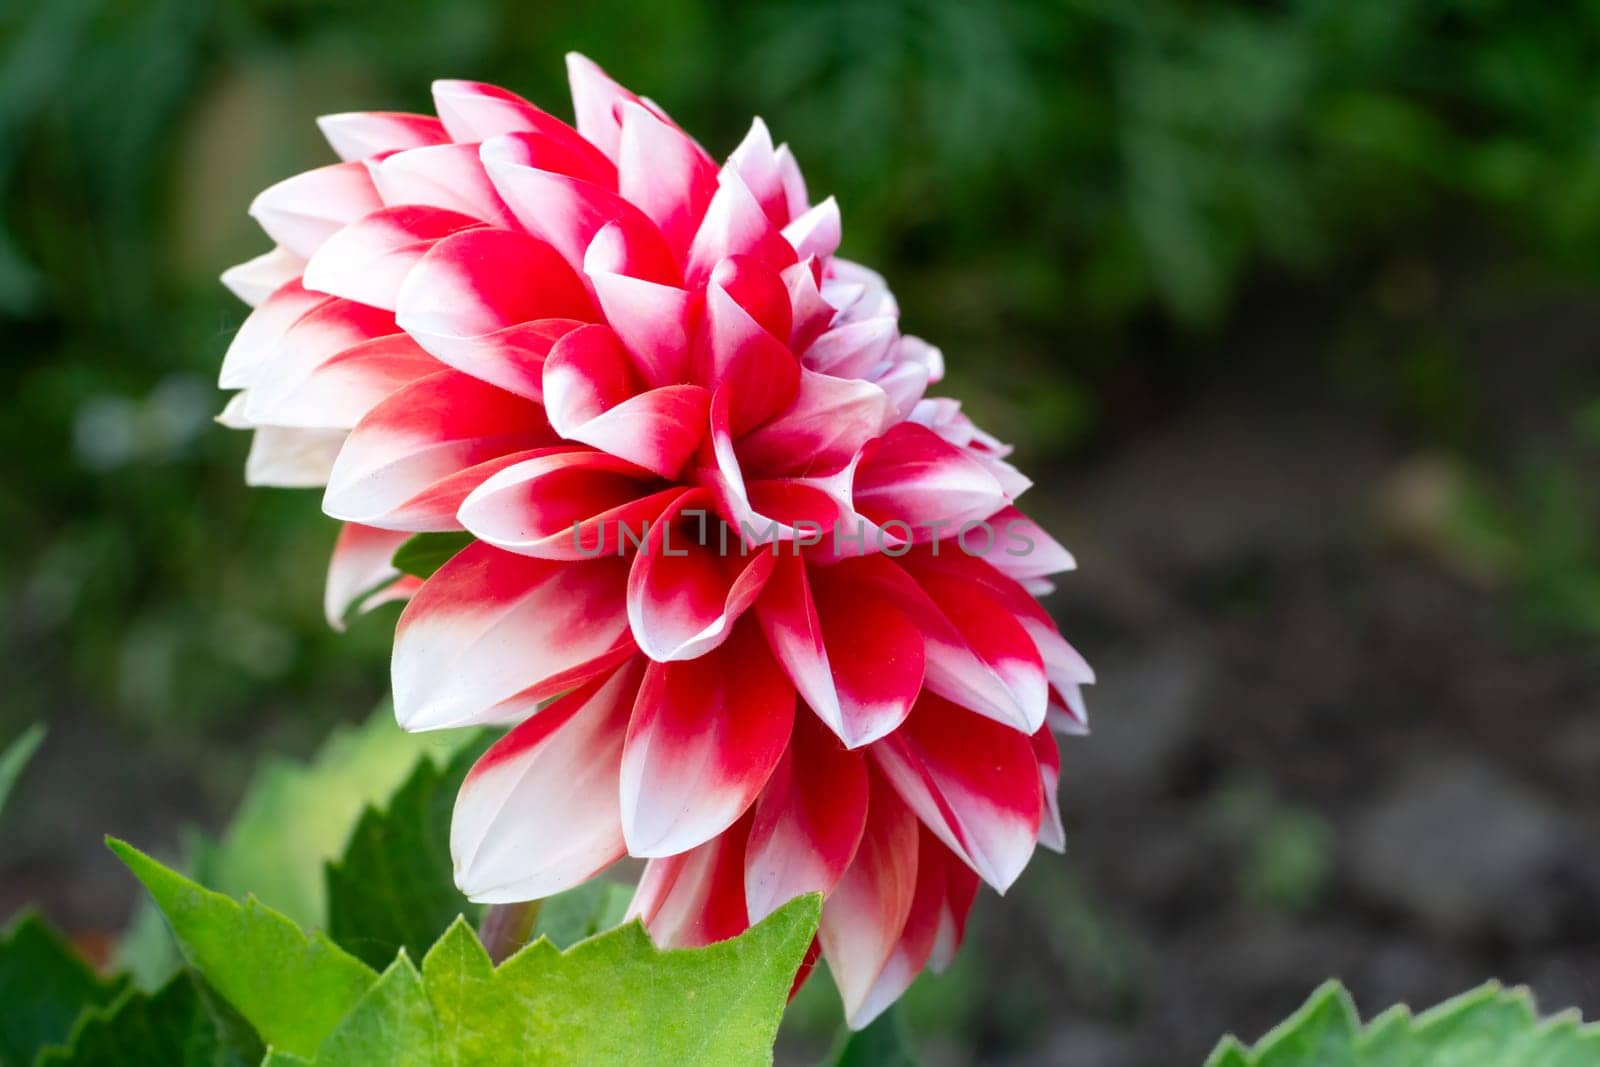 Bud of red and white dahlia growing in the garden. Shallow depth of field.